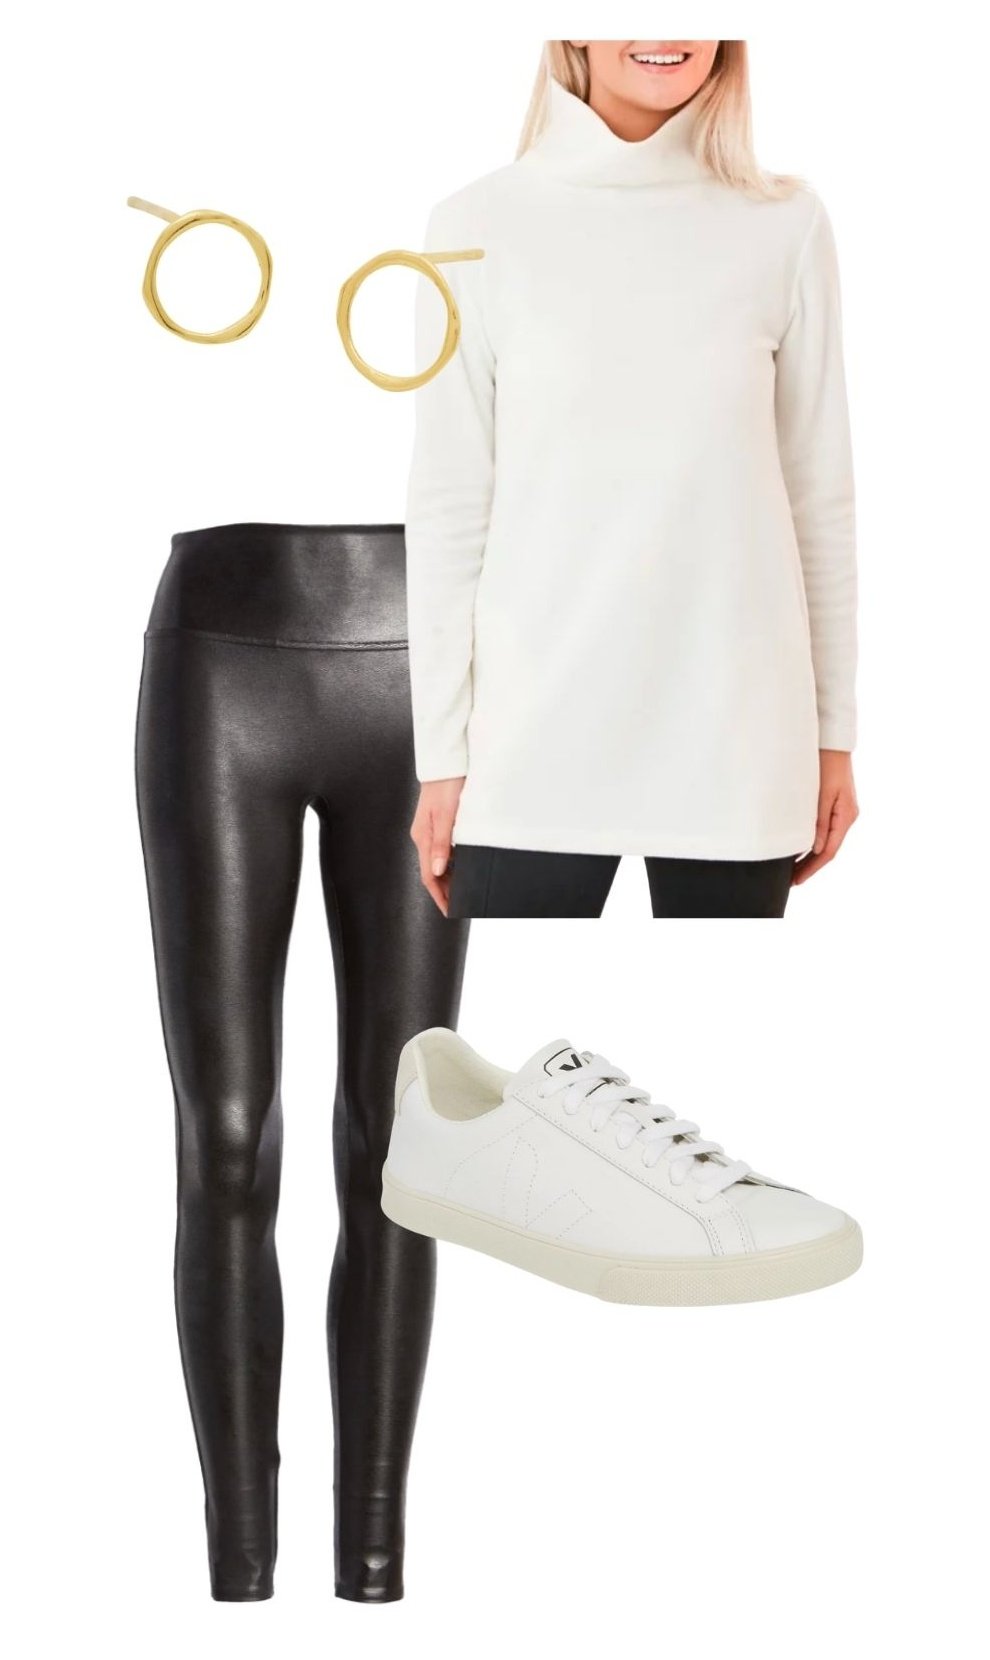 Cute Athleisure Outfit Ideas - spanx leggings outfit